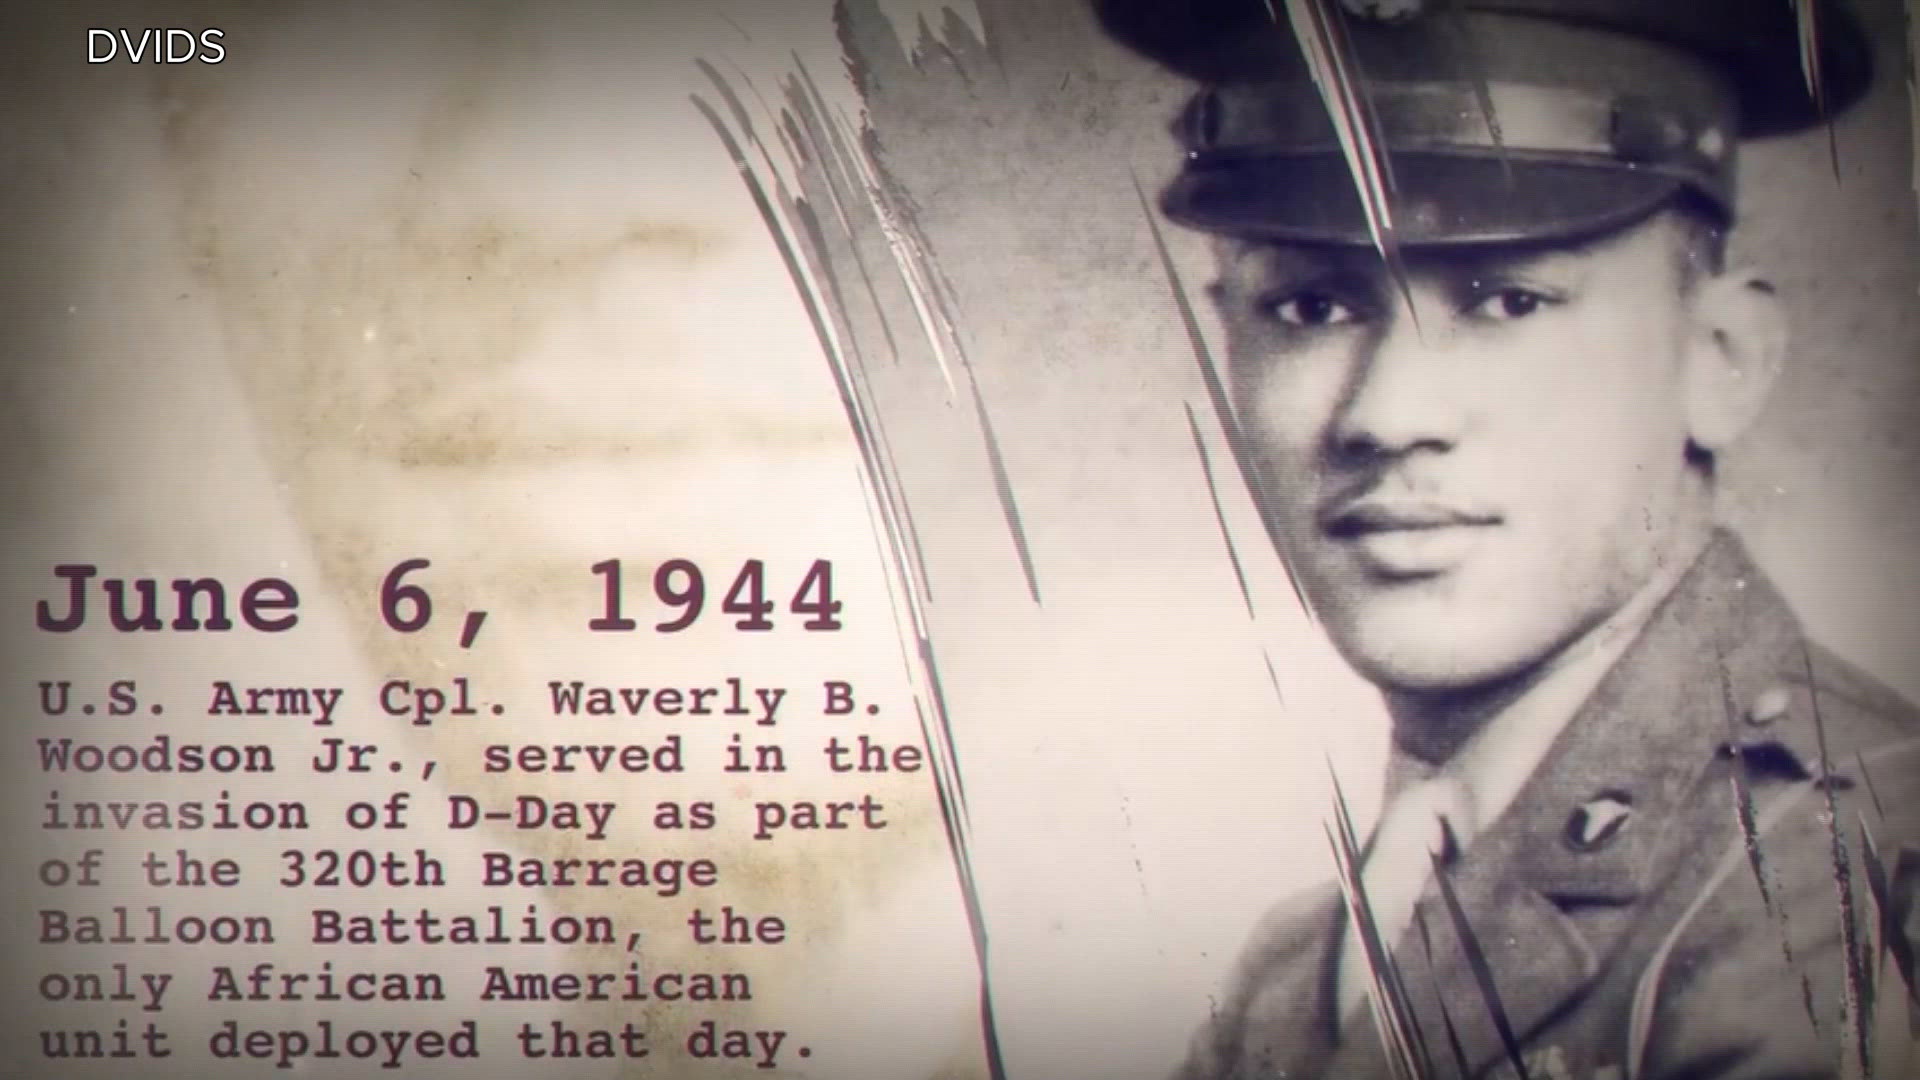 Waverly Woodson was a combat medic with the 320th Barrage Balloon Battalion, the only all-Black unit to land at Normandy.